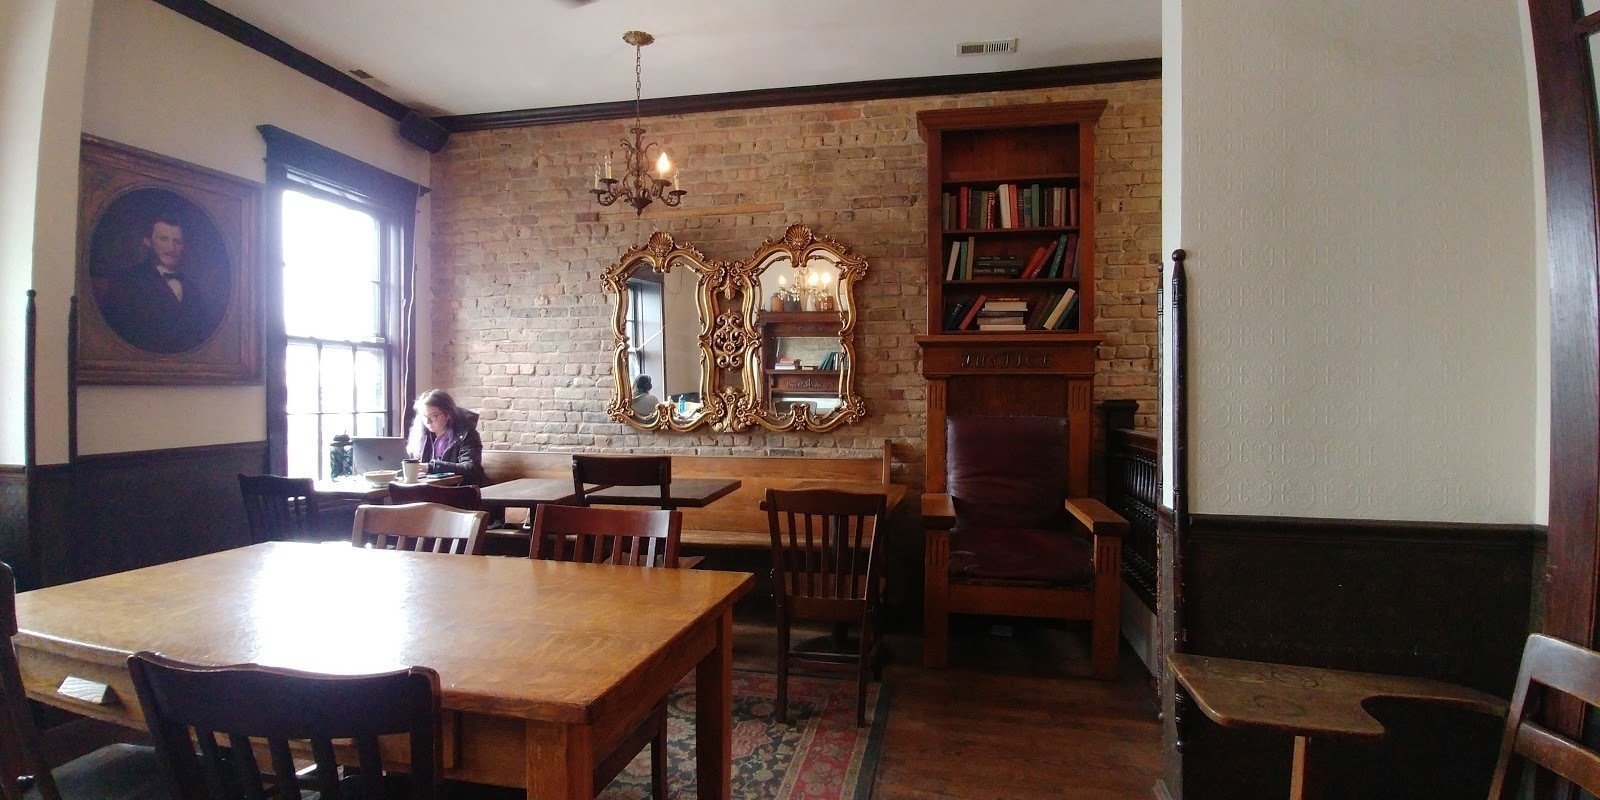 <span class="translation_missing" title="translation missing: en.meta.location_title, location_name: Bourgeois Pig Cafe, city: Chicago">Location Title</span>